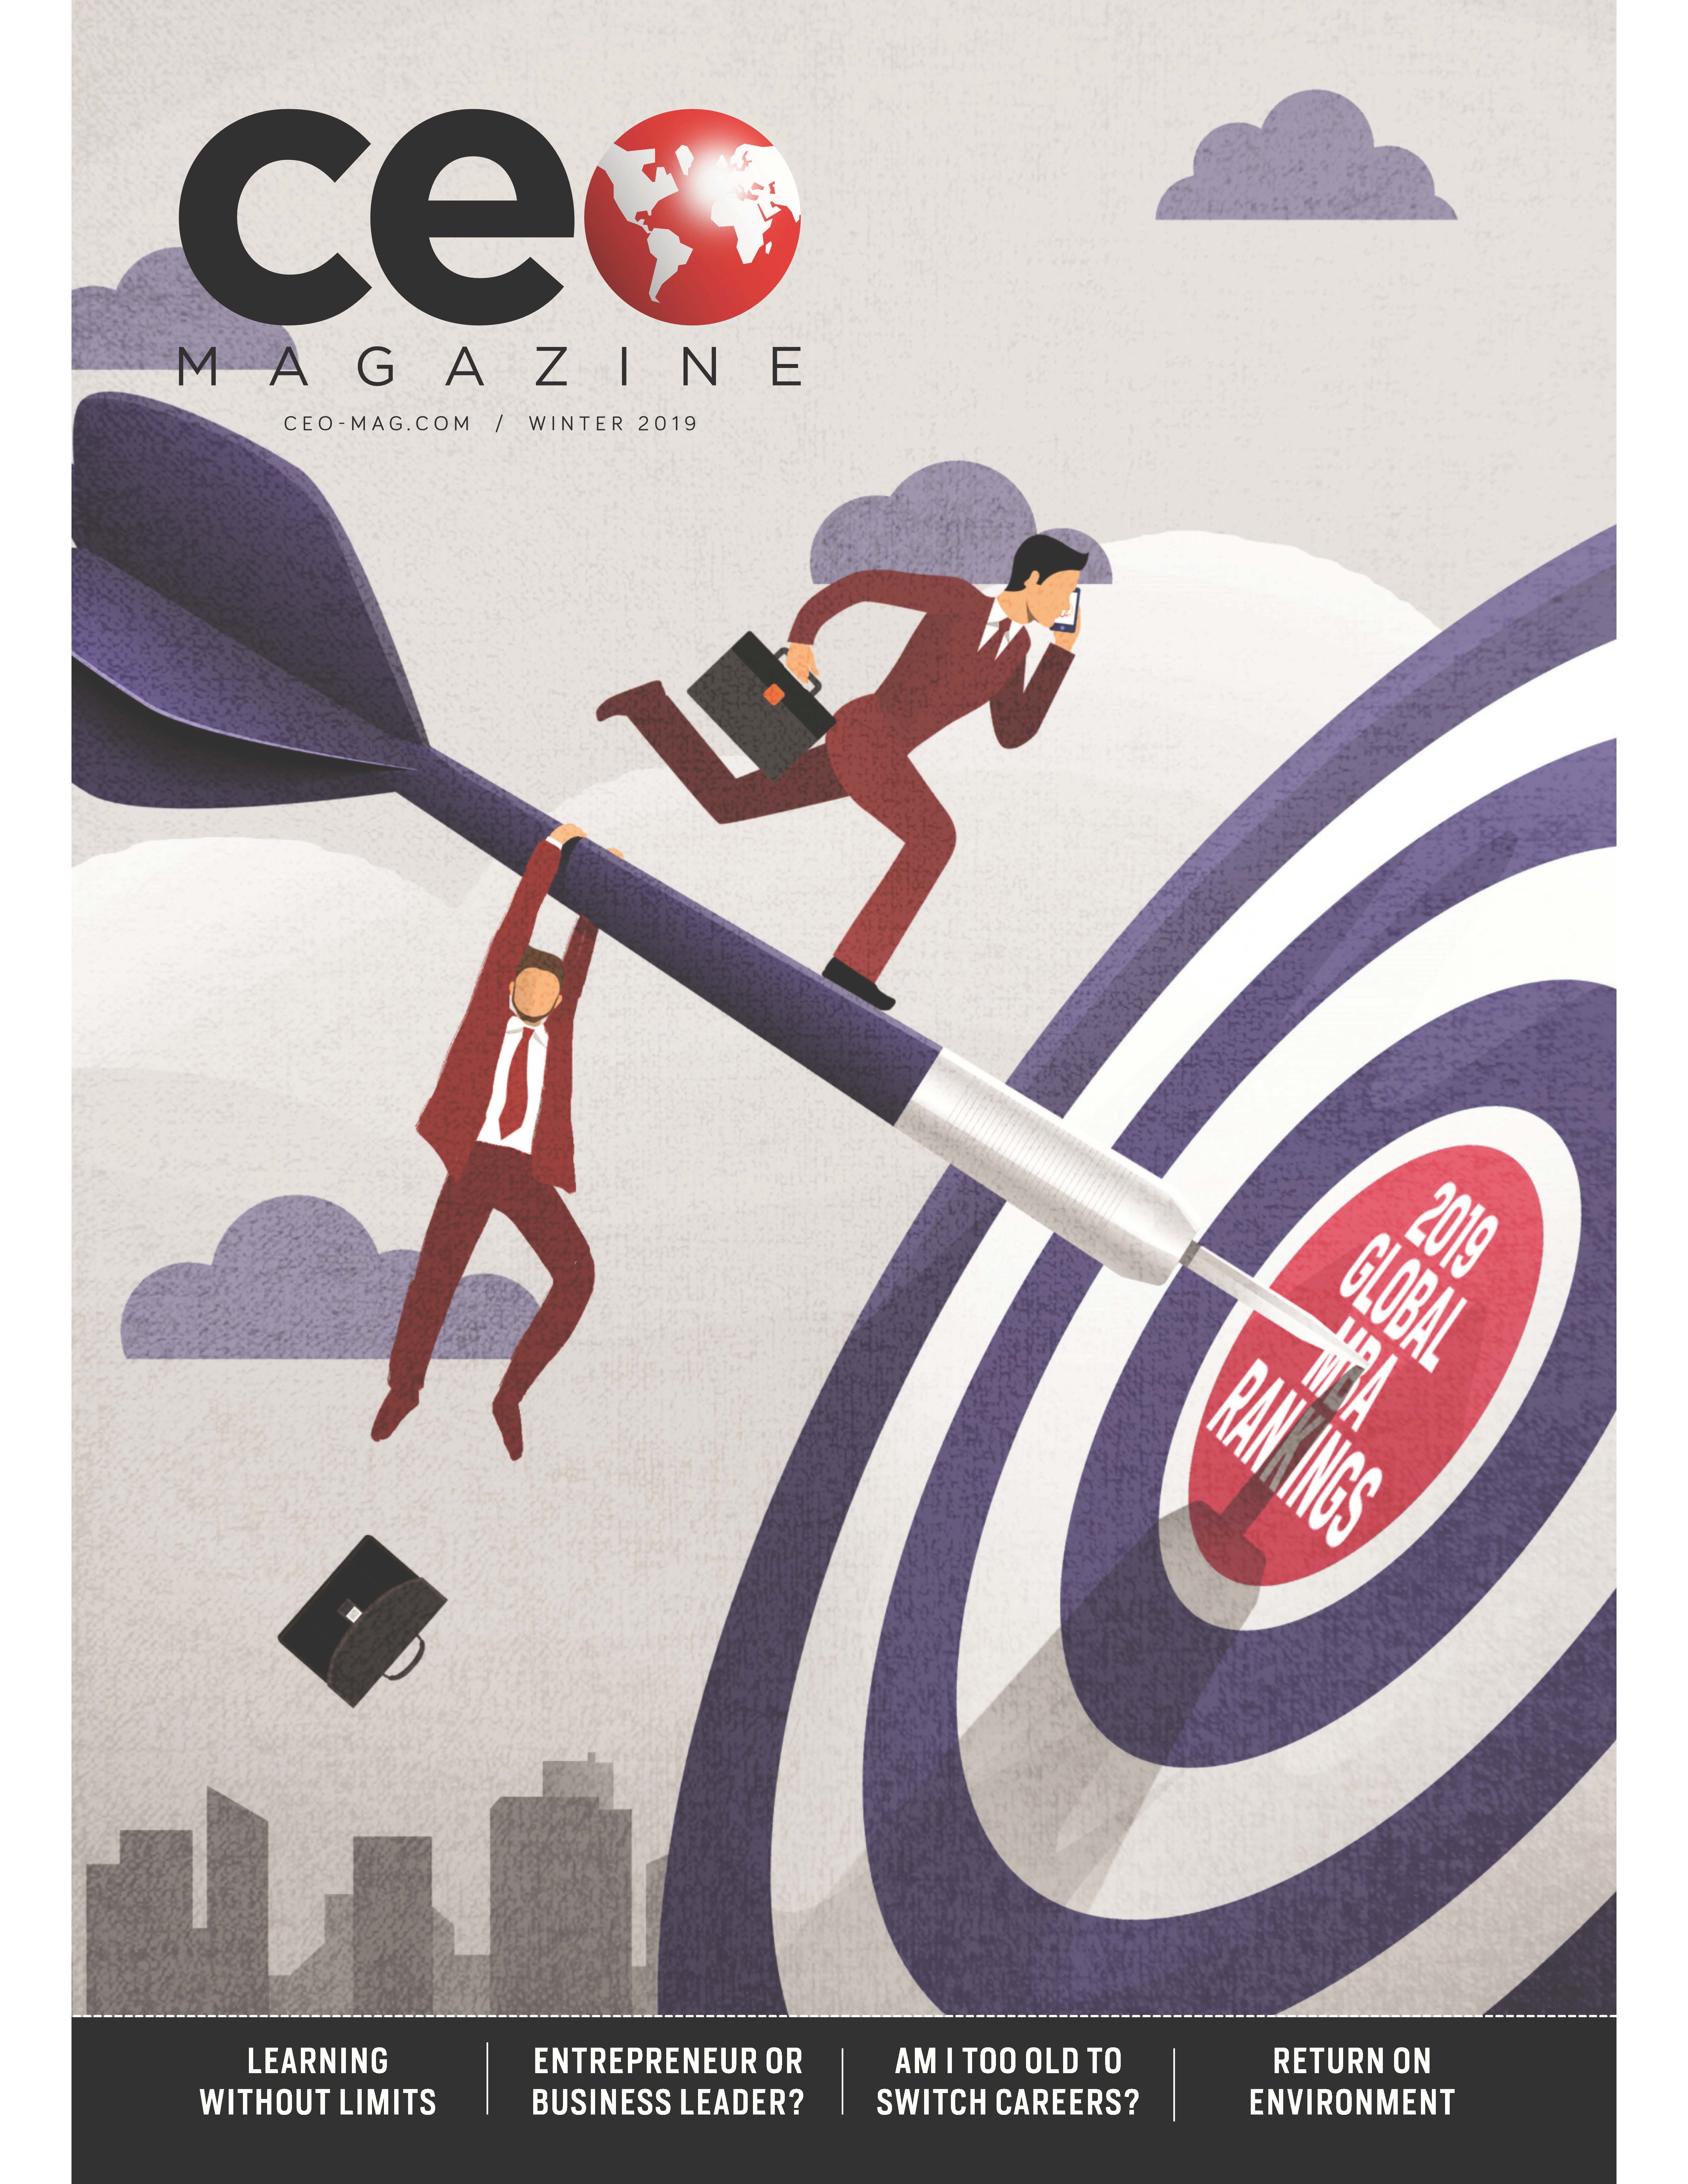 Image of the cover of a CEO Magazine